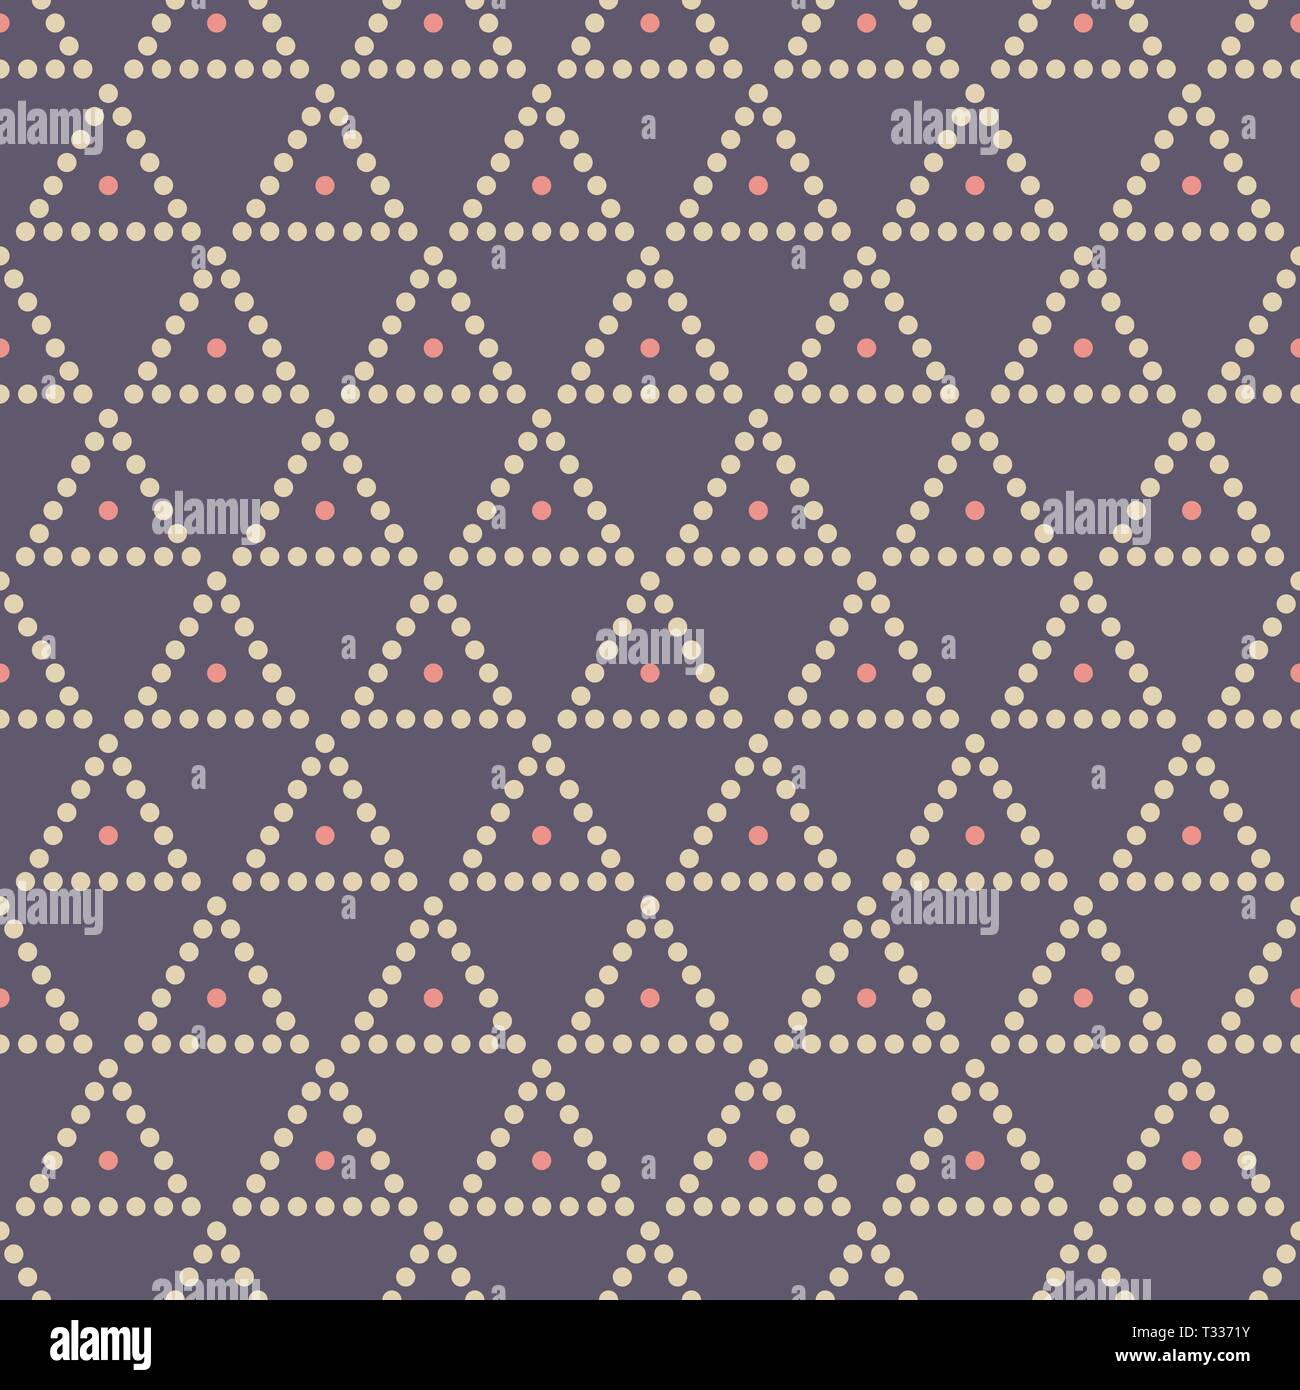 Abstract seamless color pattern. Modern stylish texture. Repeating geometric tiles with dotted triangles. Simple minimalistic vector background. Stock Vector